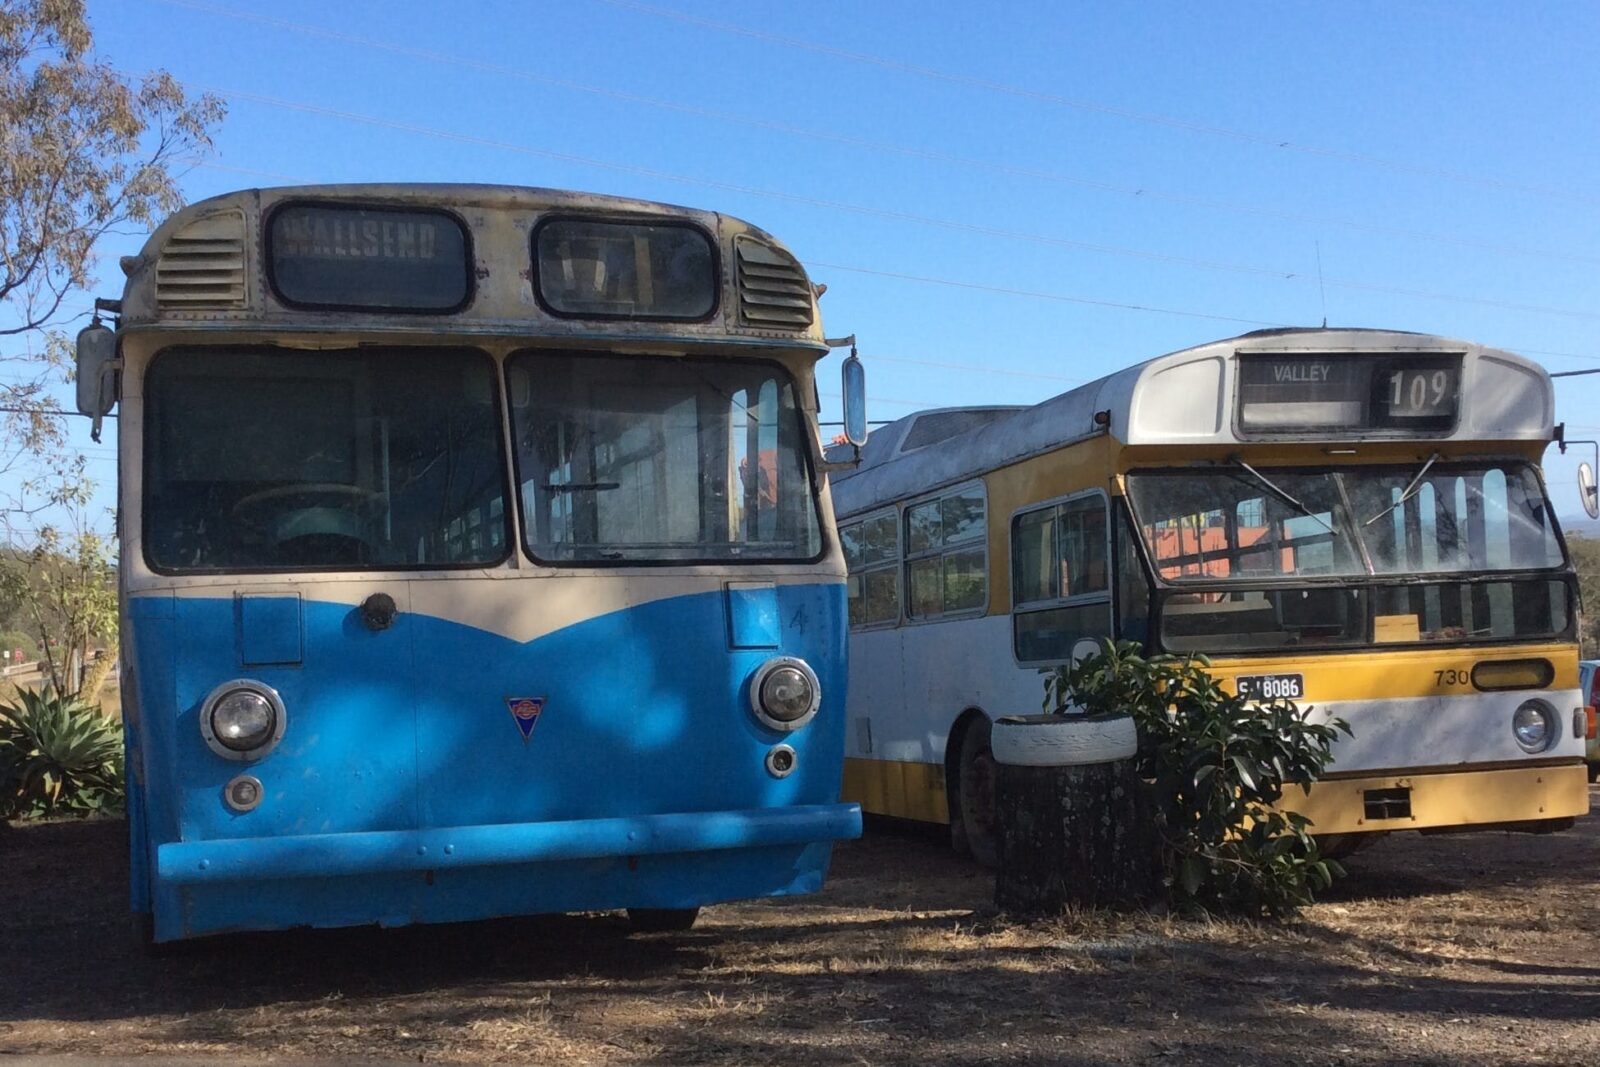 Two of the heritage buses at Cooneana